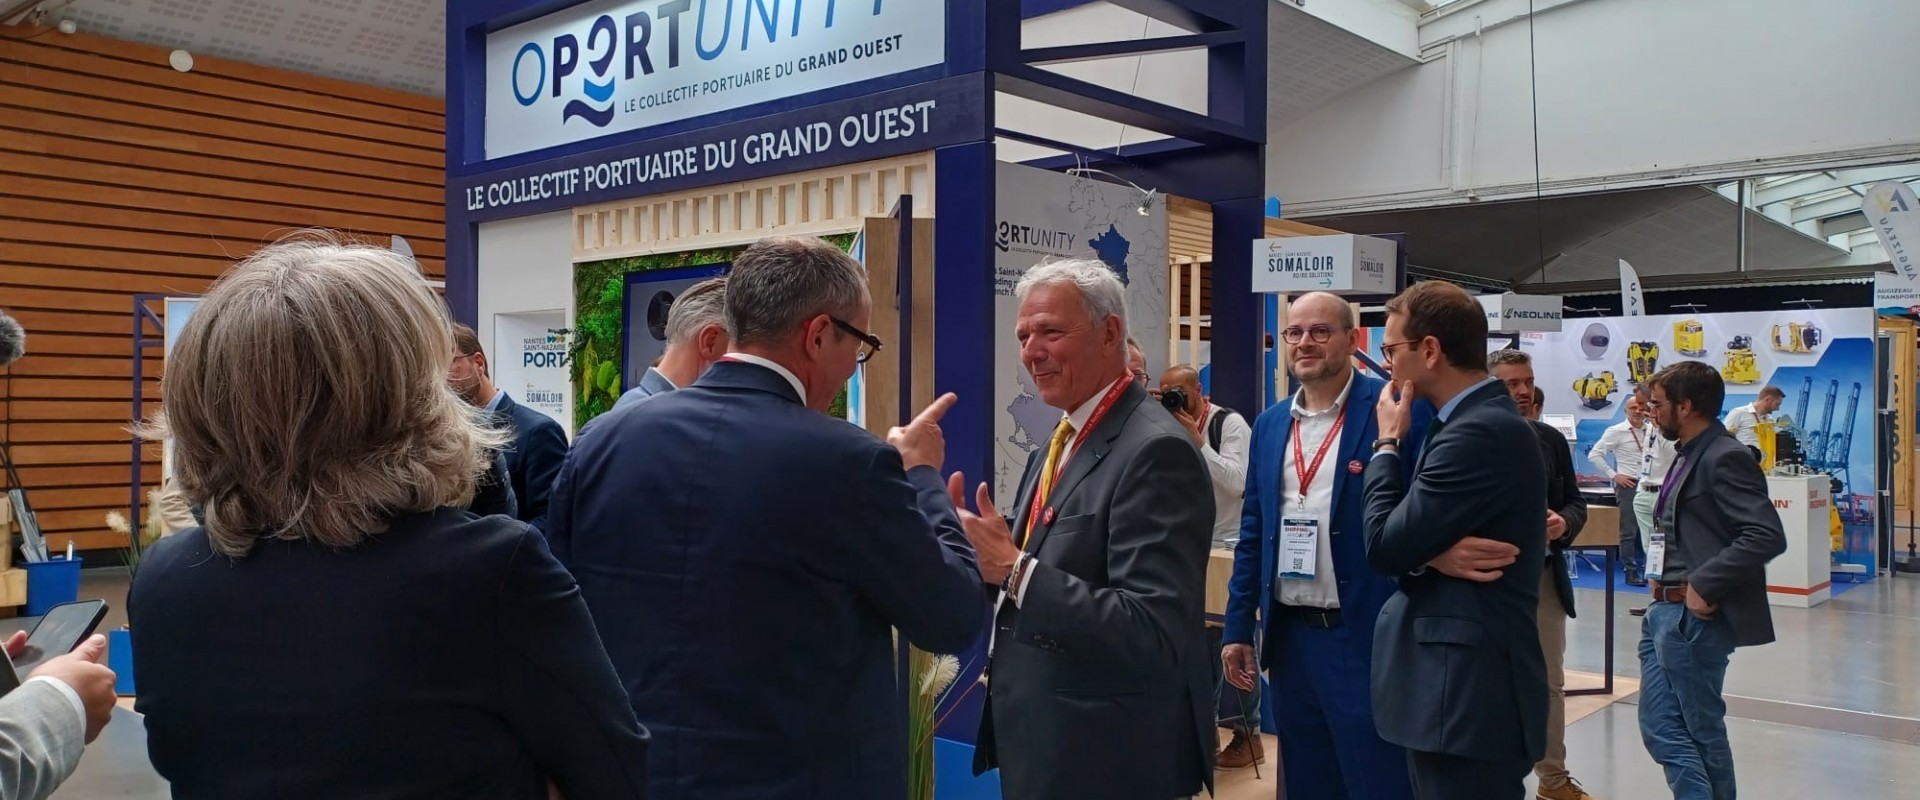 Oportunity Takes Part in the Second Edition of the Shipping Days Trade Show